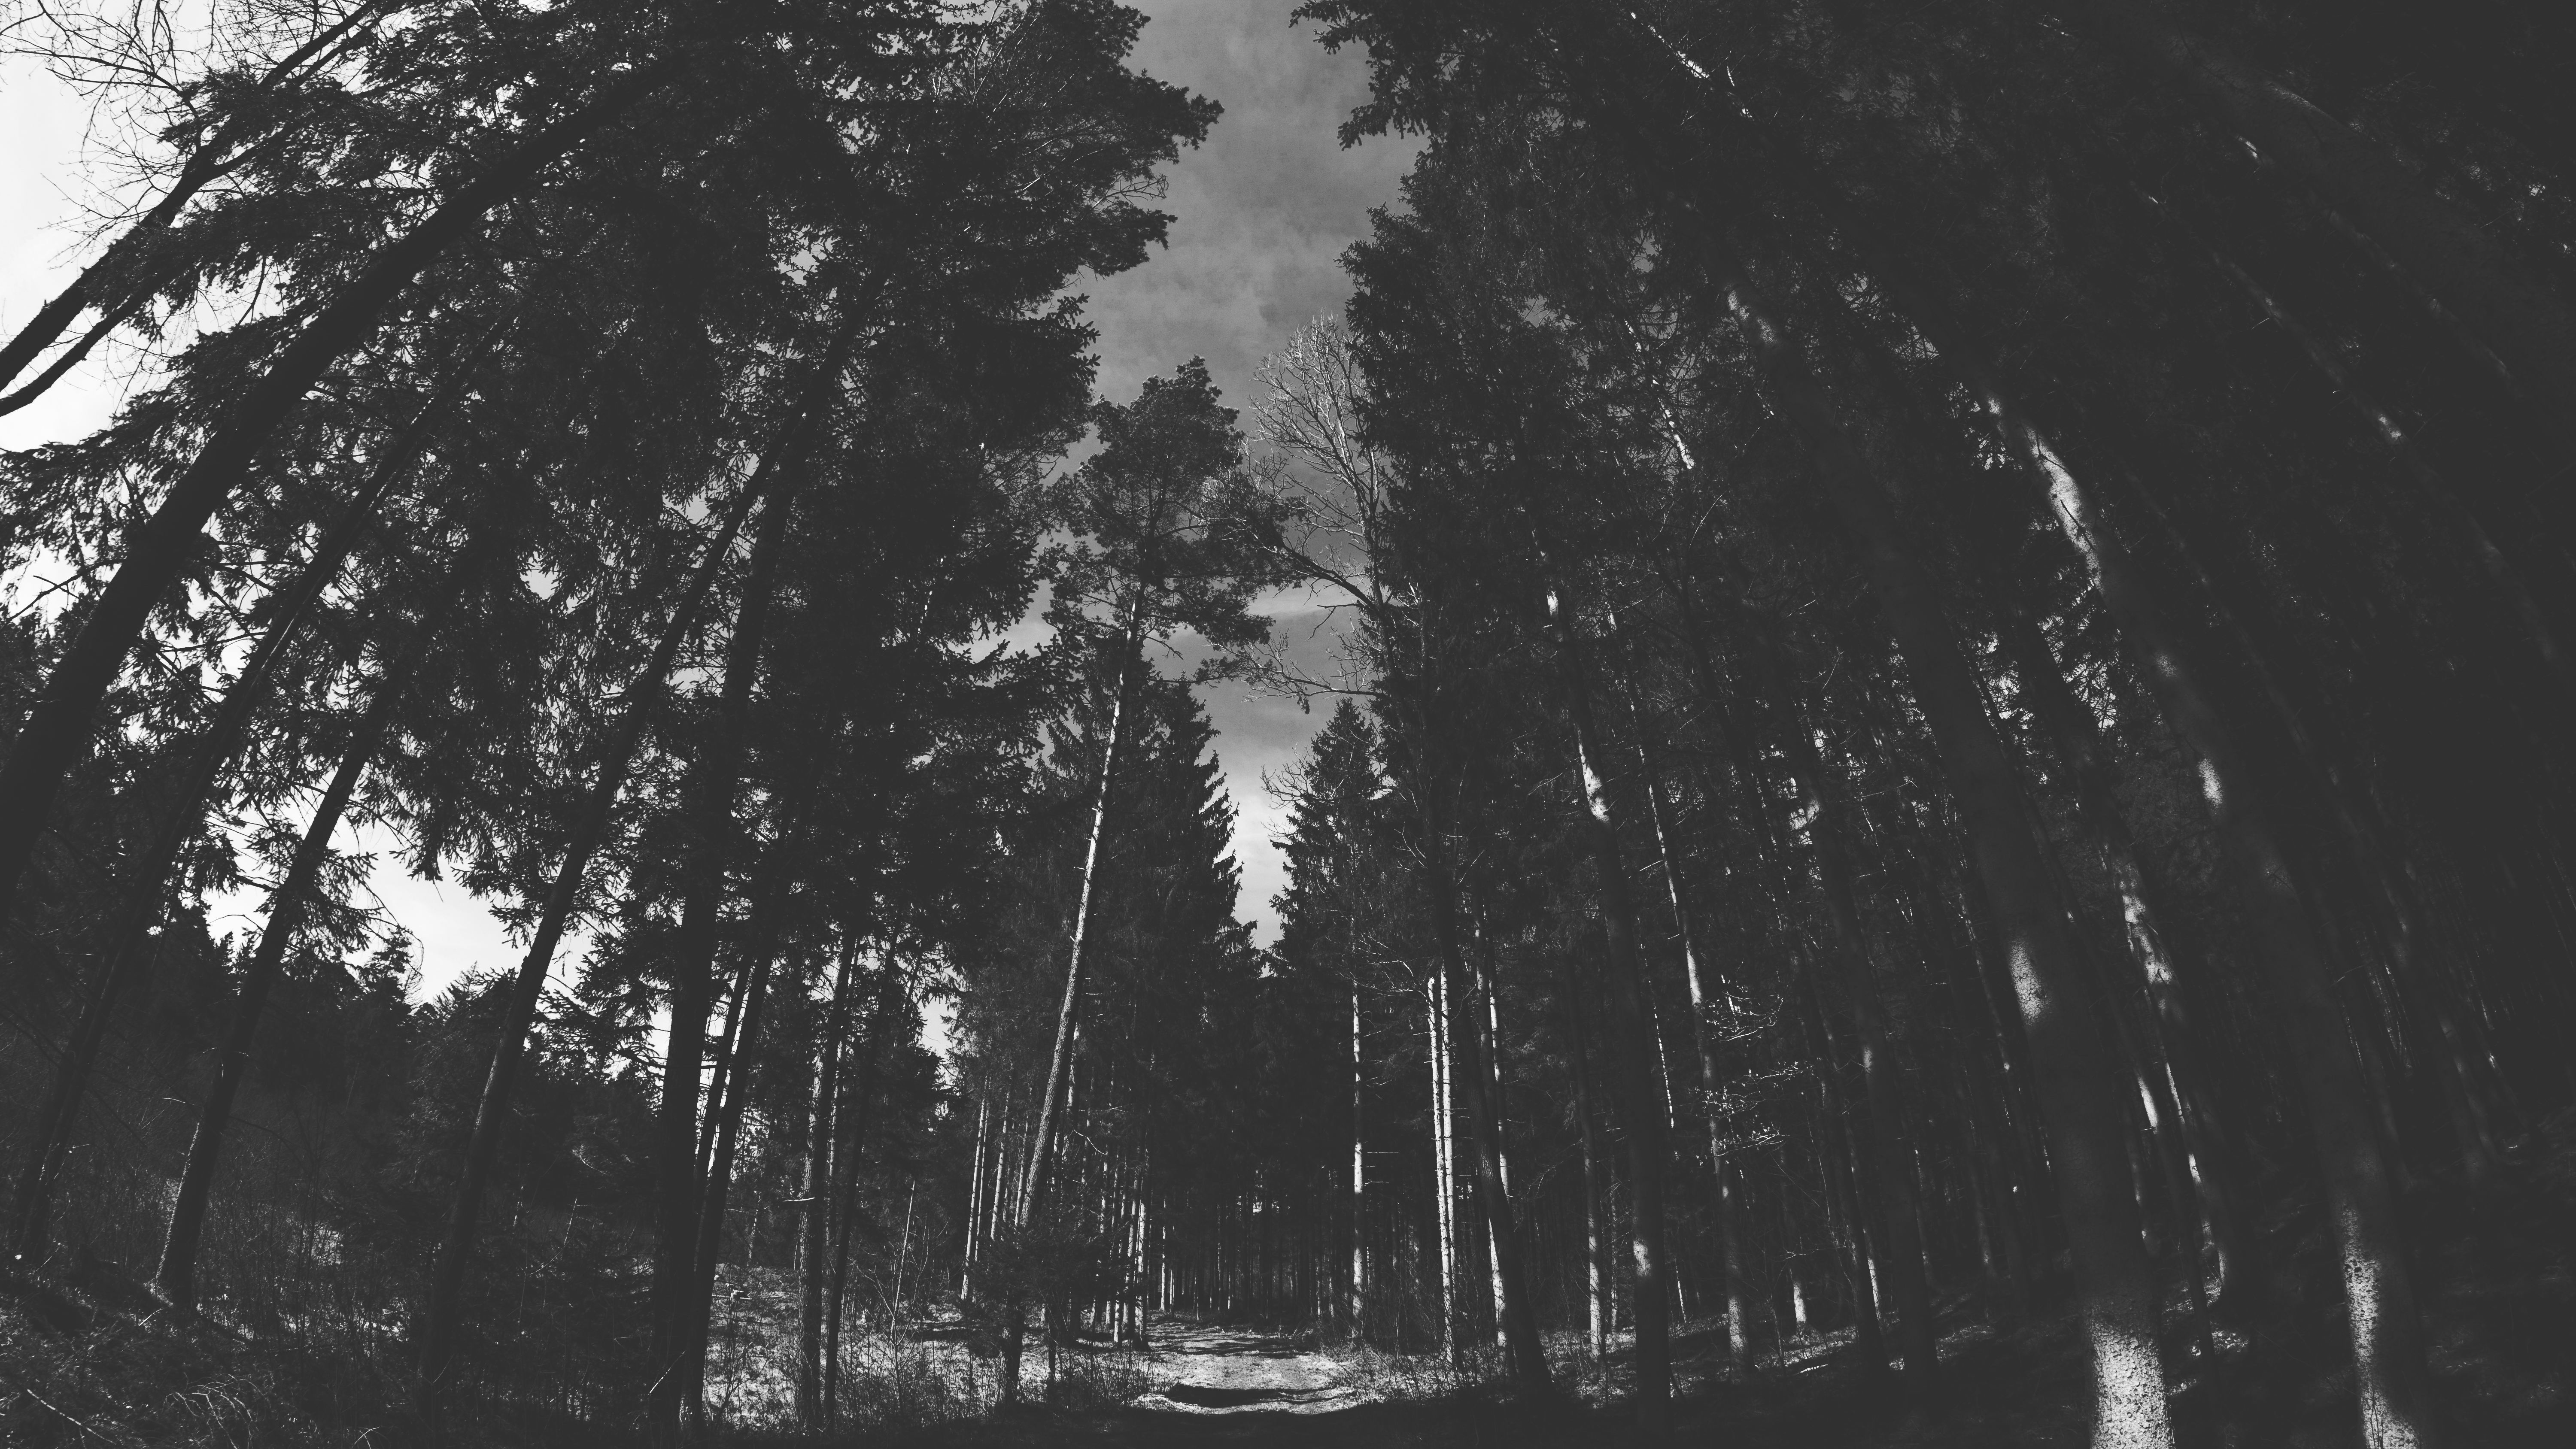 General 6000x3376 nature trees forest monochrome dark outdoors